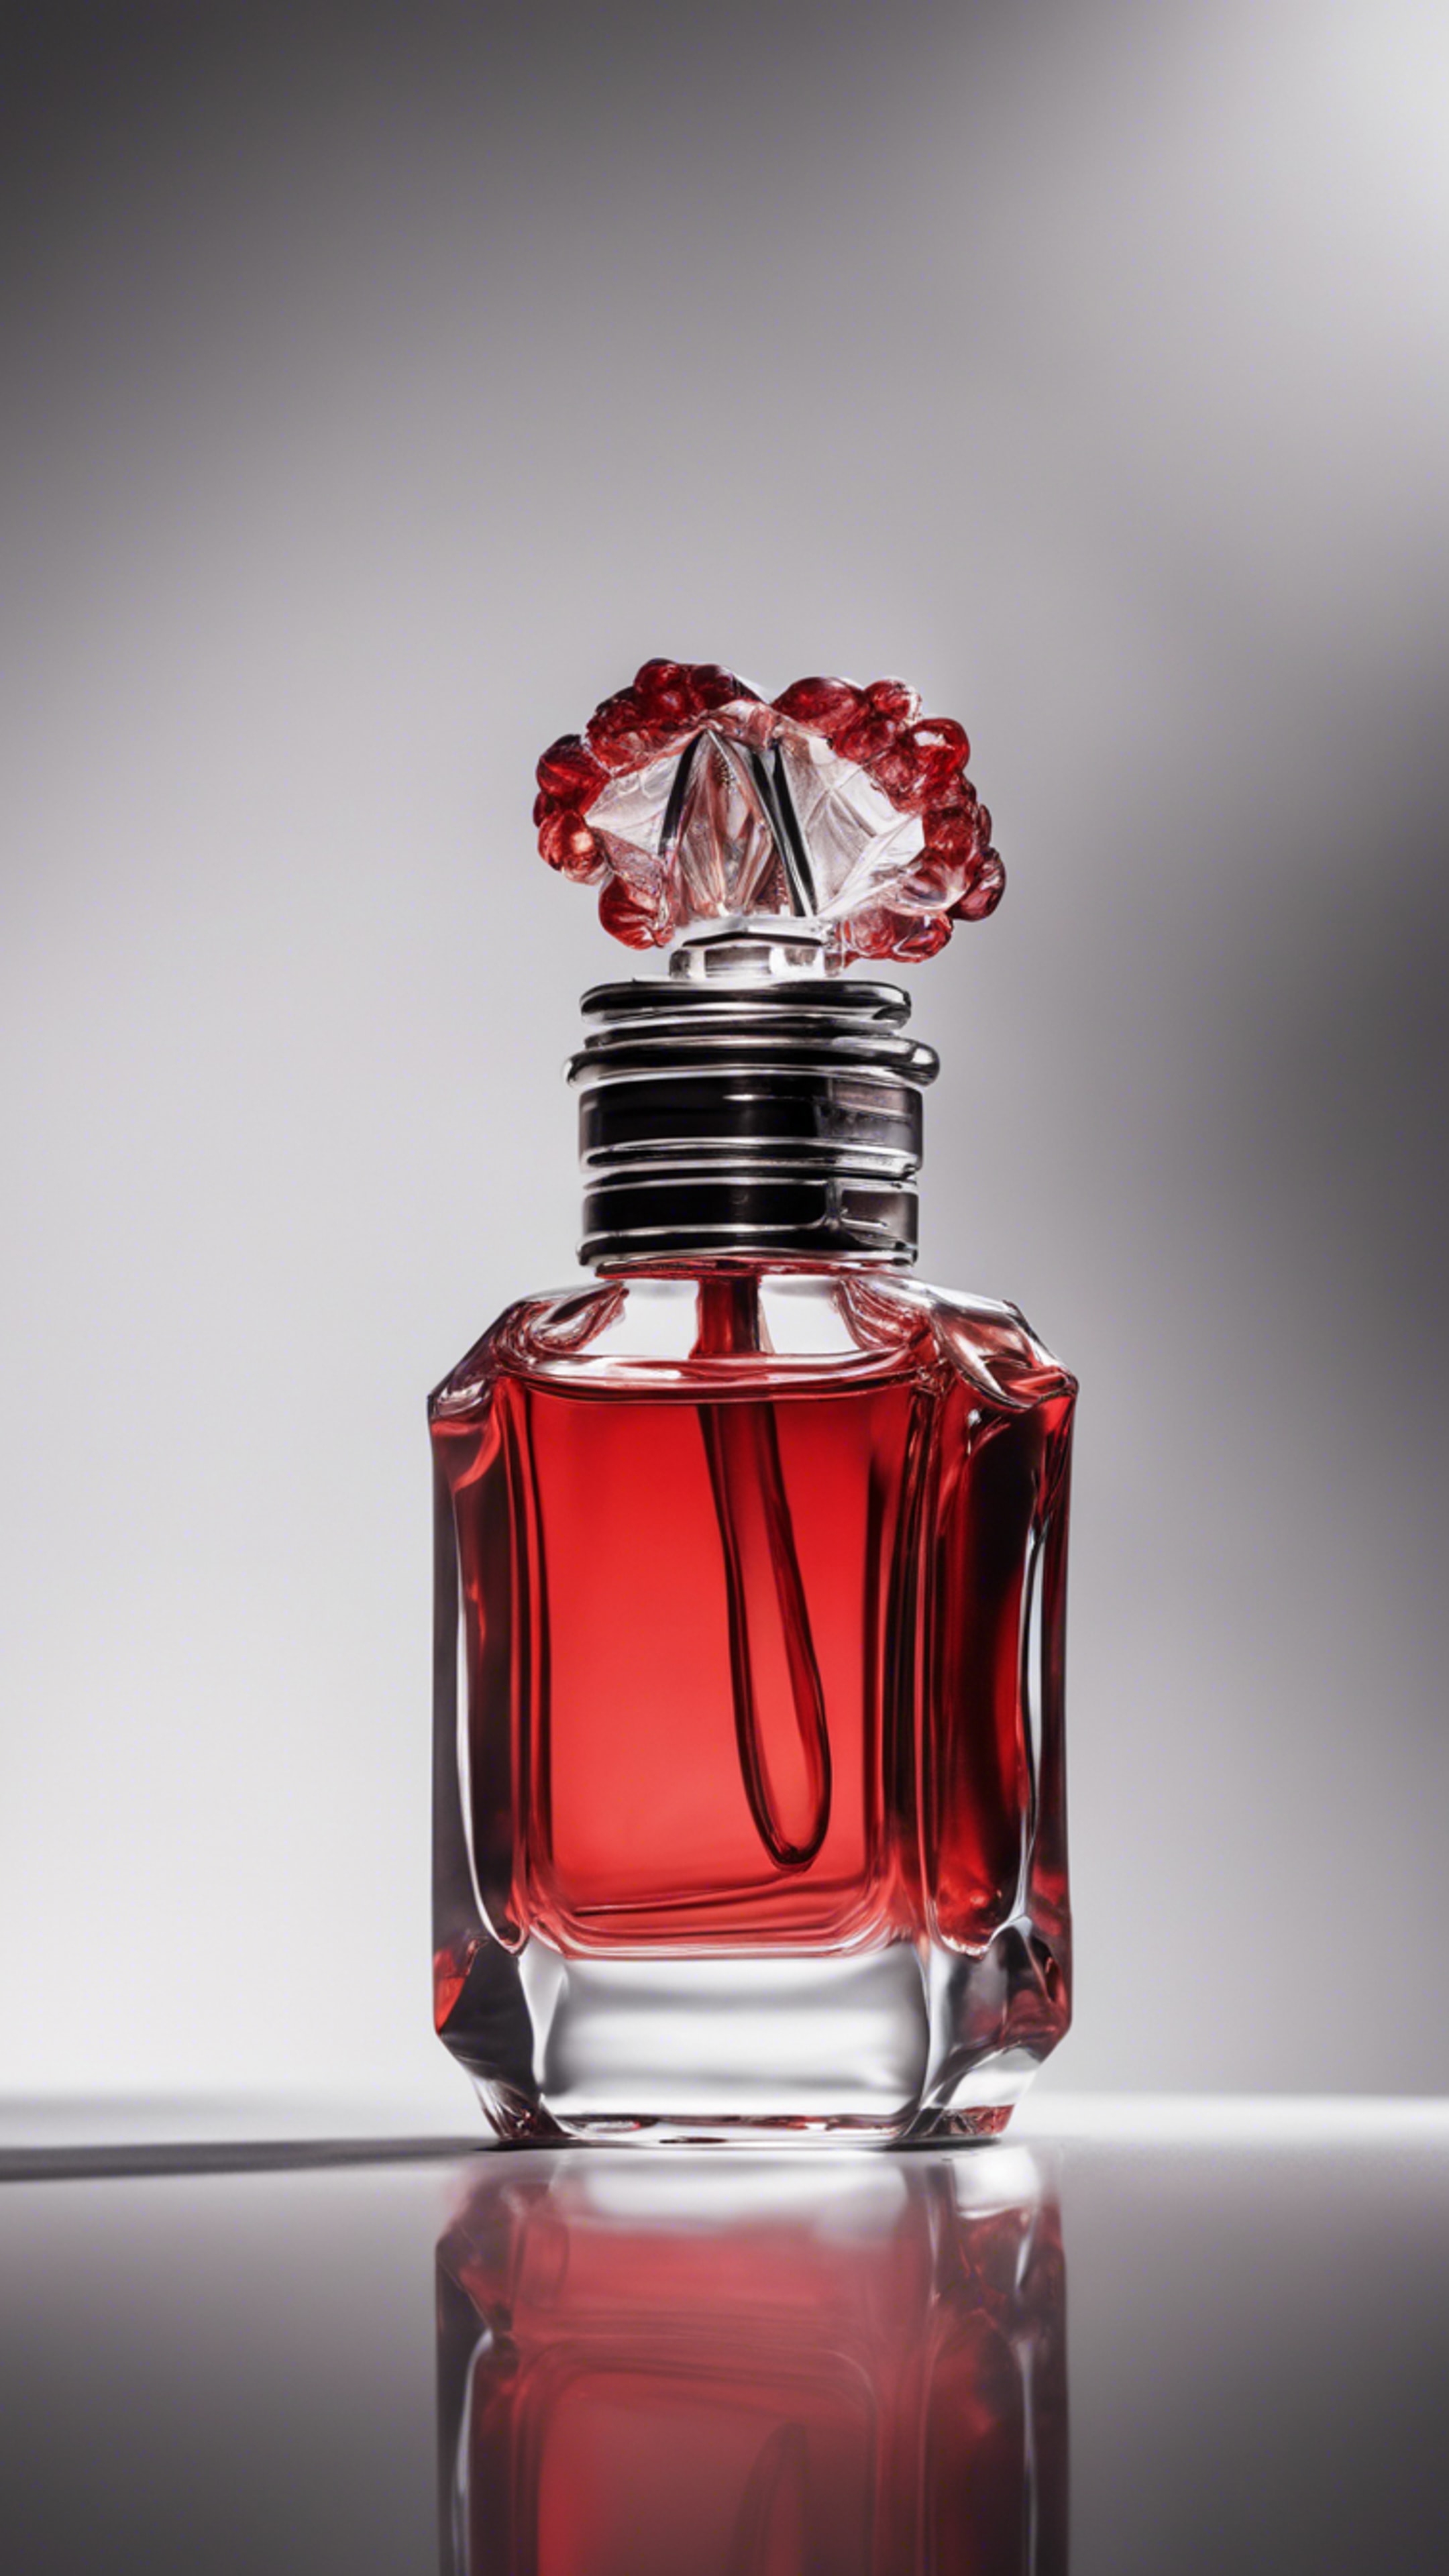 The portrait of a sassy red perfume bottle clashing against a pure white backdrop. טפט[8445b62606744831bb5a]